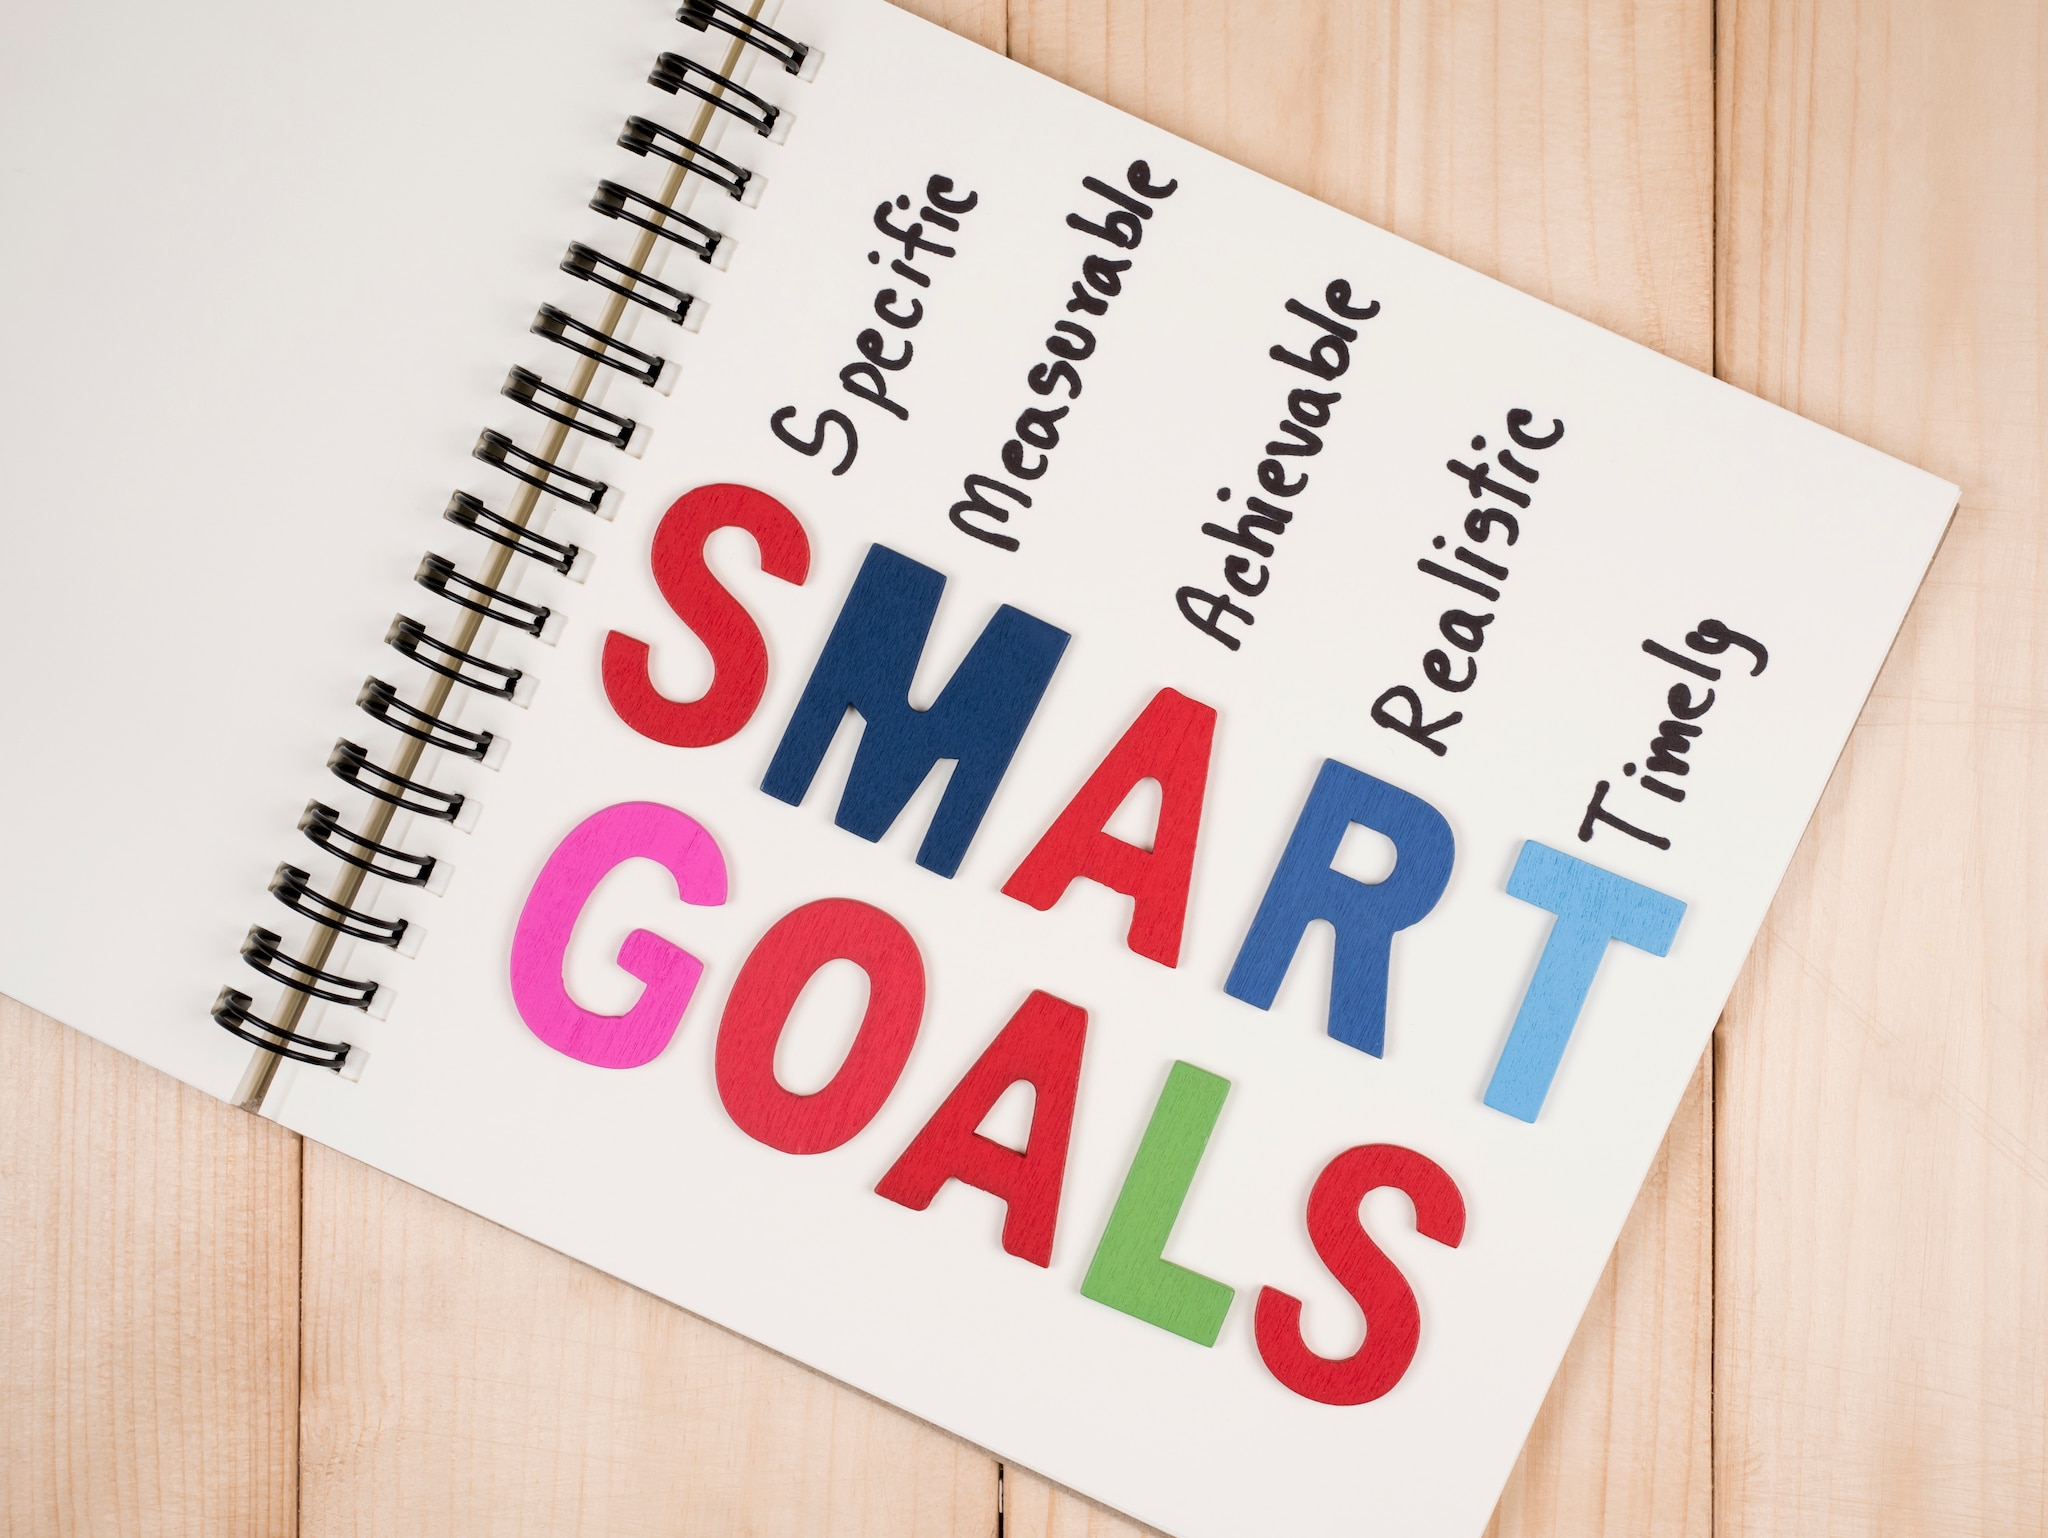 SMART Goals on blank notebook with wood background (Business Concept)